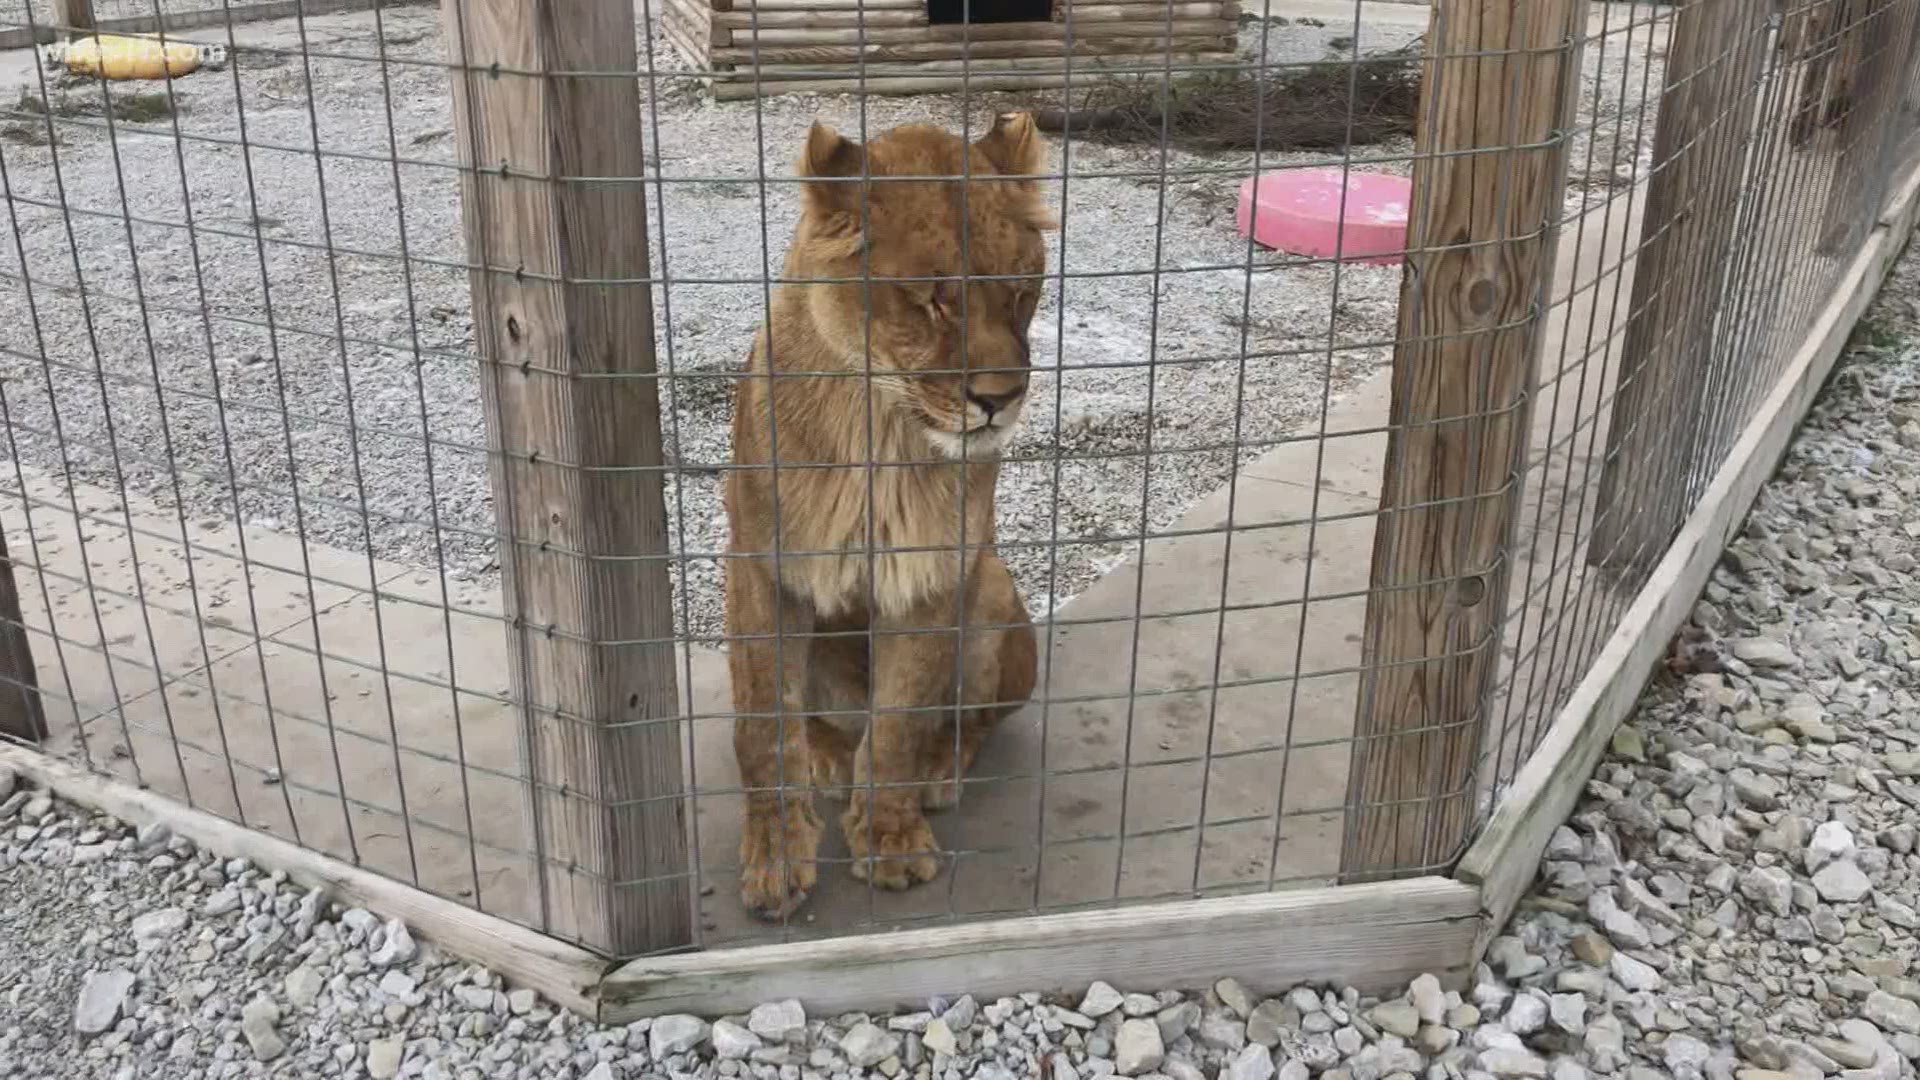 The Indianapolis Zoological Society was granted access for several days to remove the more than 200 animals from the Wildlife In Need property.